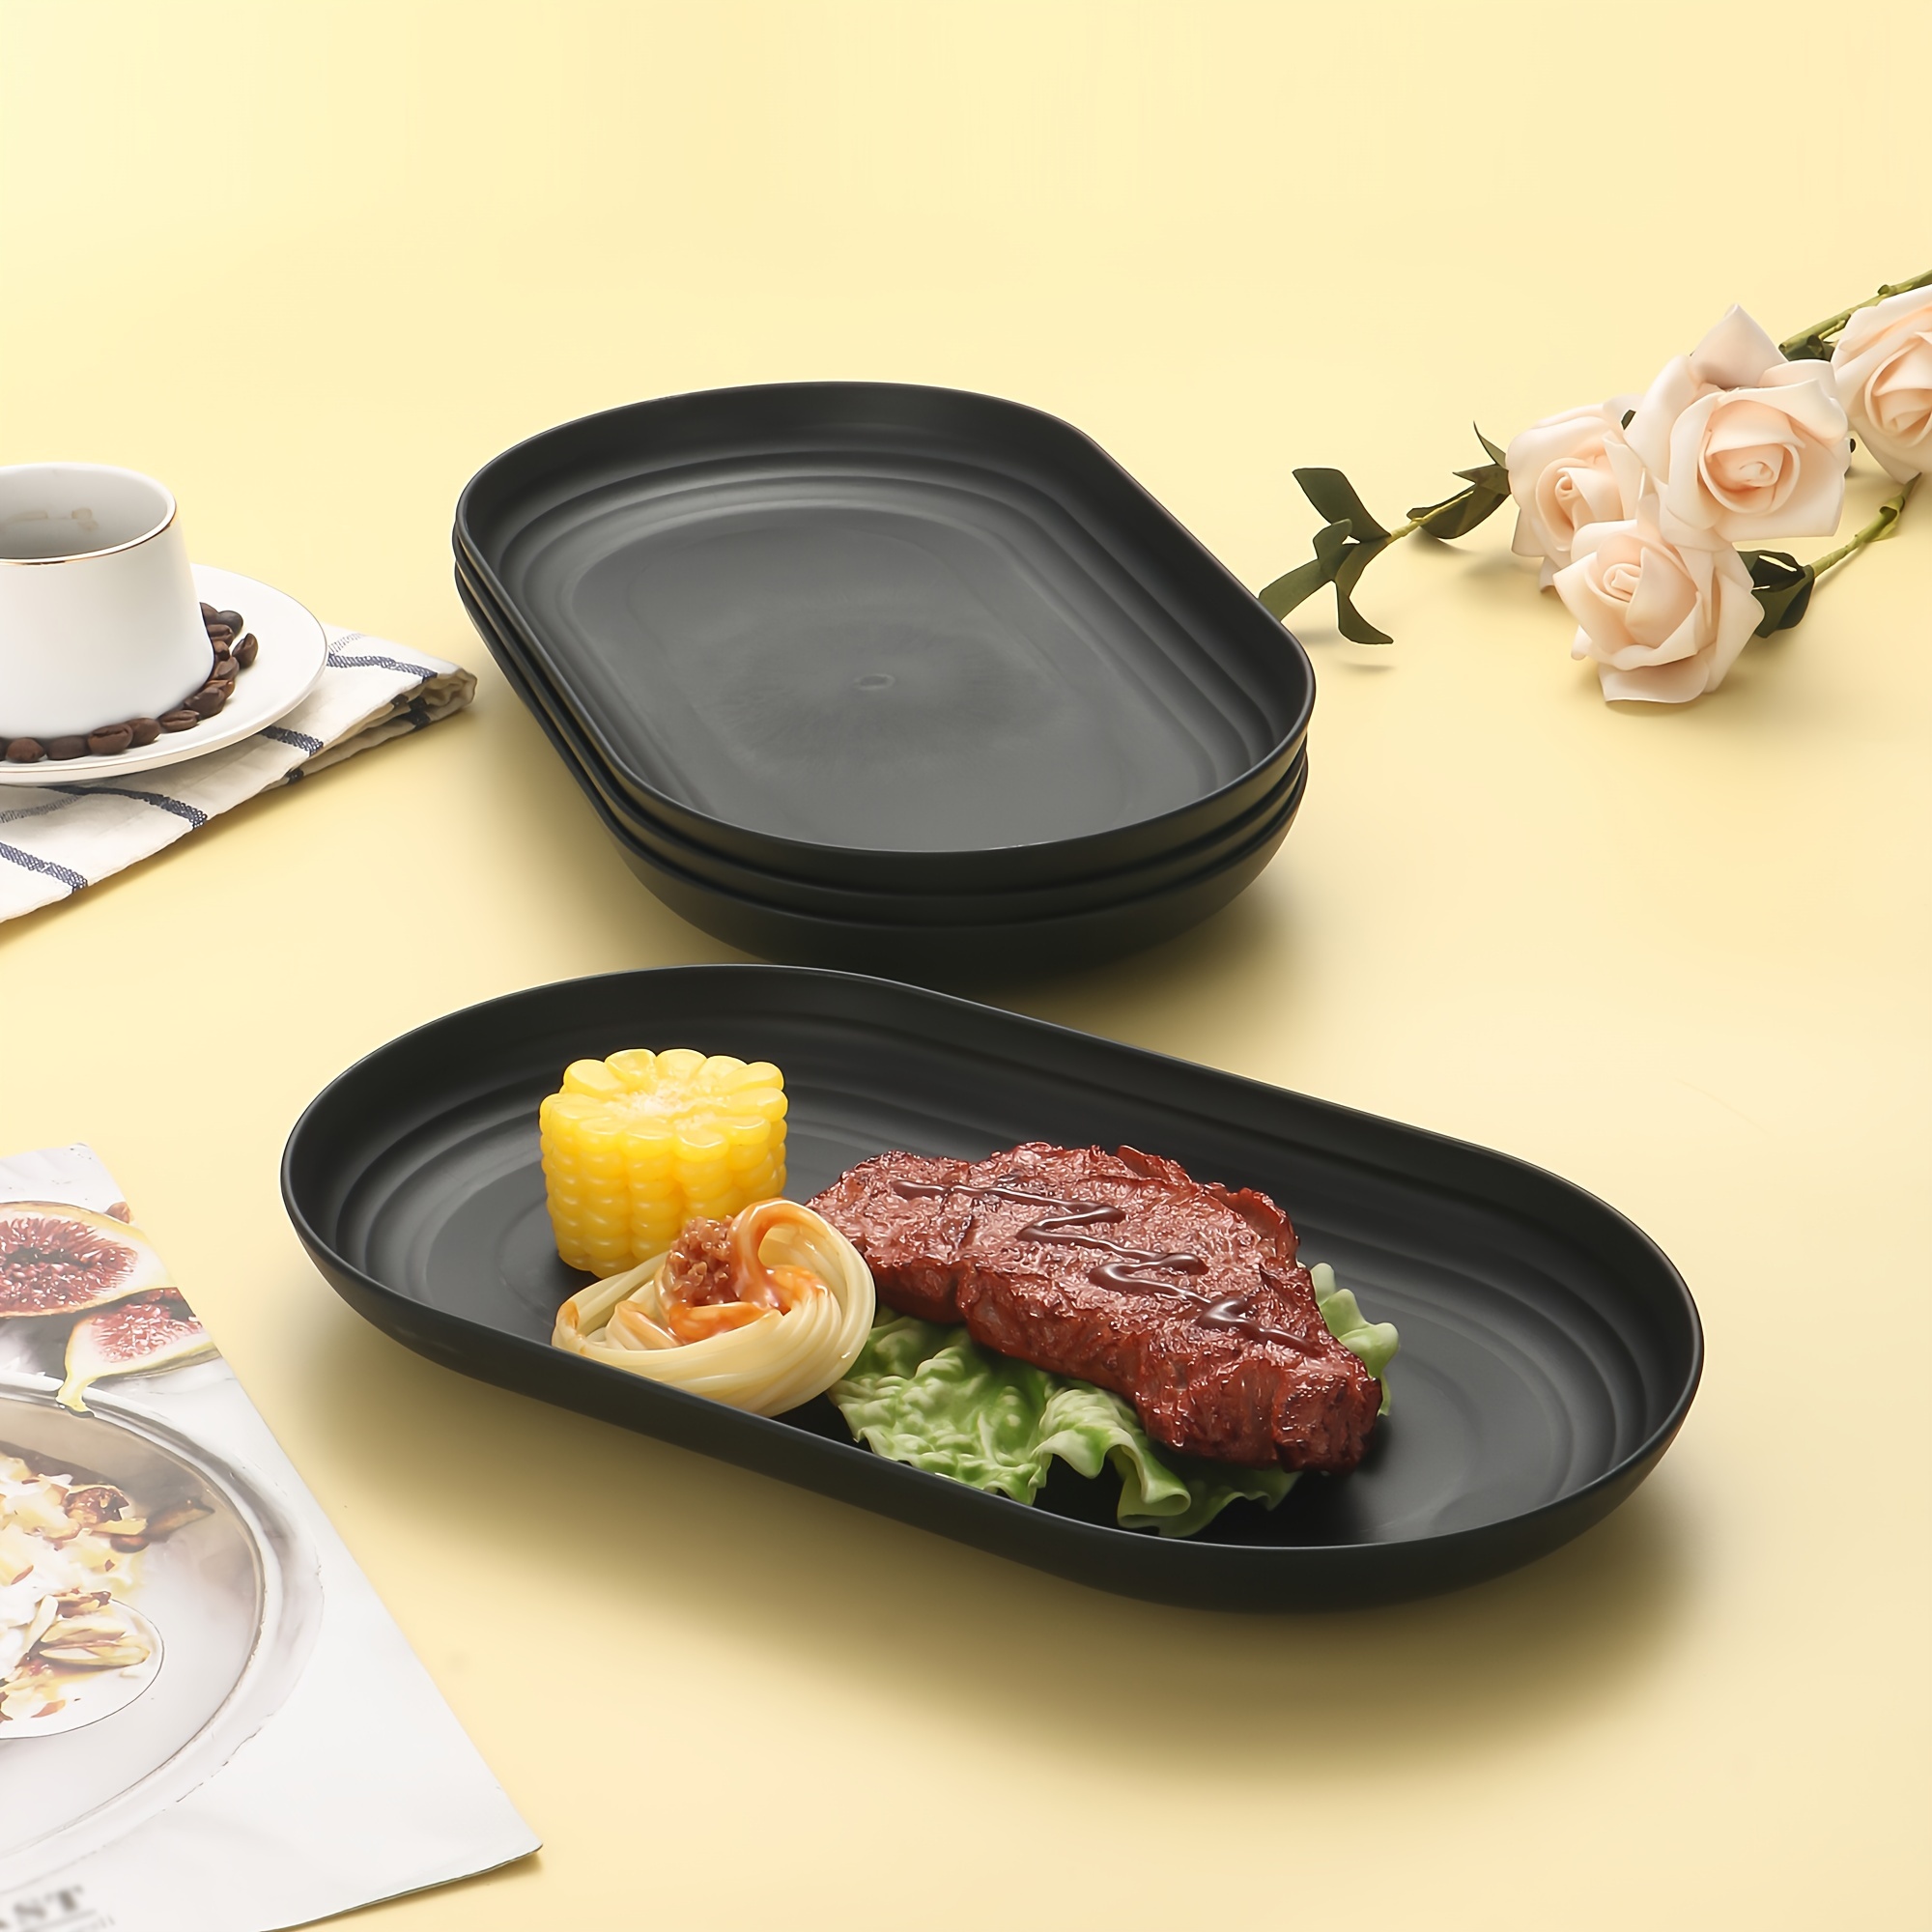 

4/6/8pcs/set Black Oval Pp Plastic Plates, Small Serving Dishes For Dining Home, Snack Plates, Candy Dishes, For Home Kitchen Restaurant Picnic Camping Party, Kitchen Supplies, Tableware Accessories